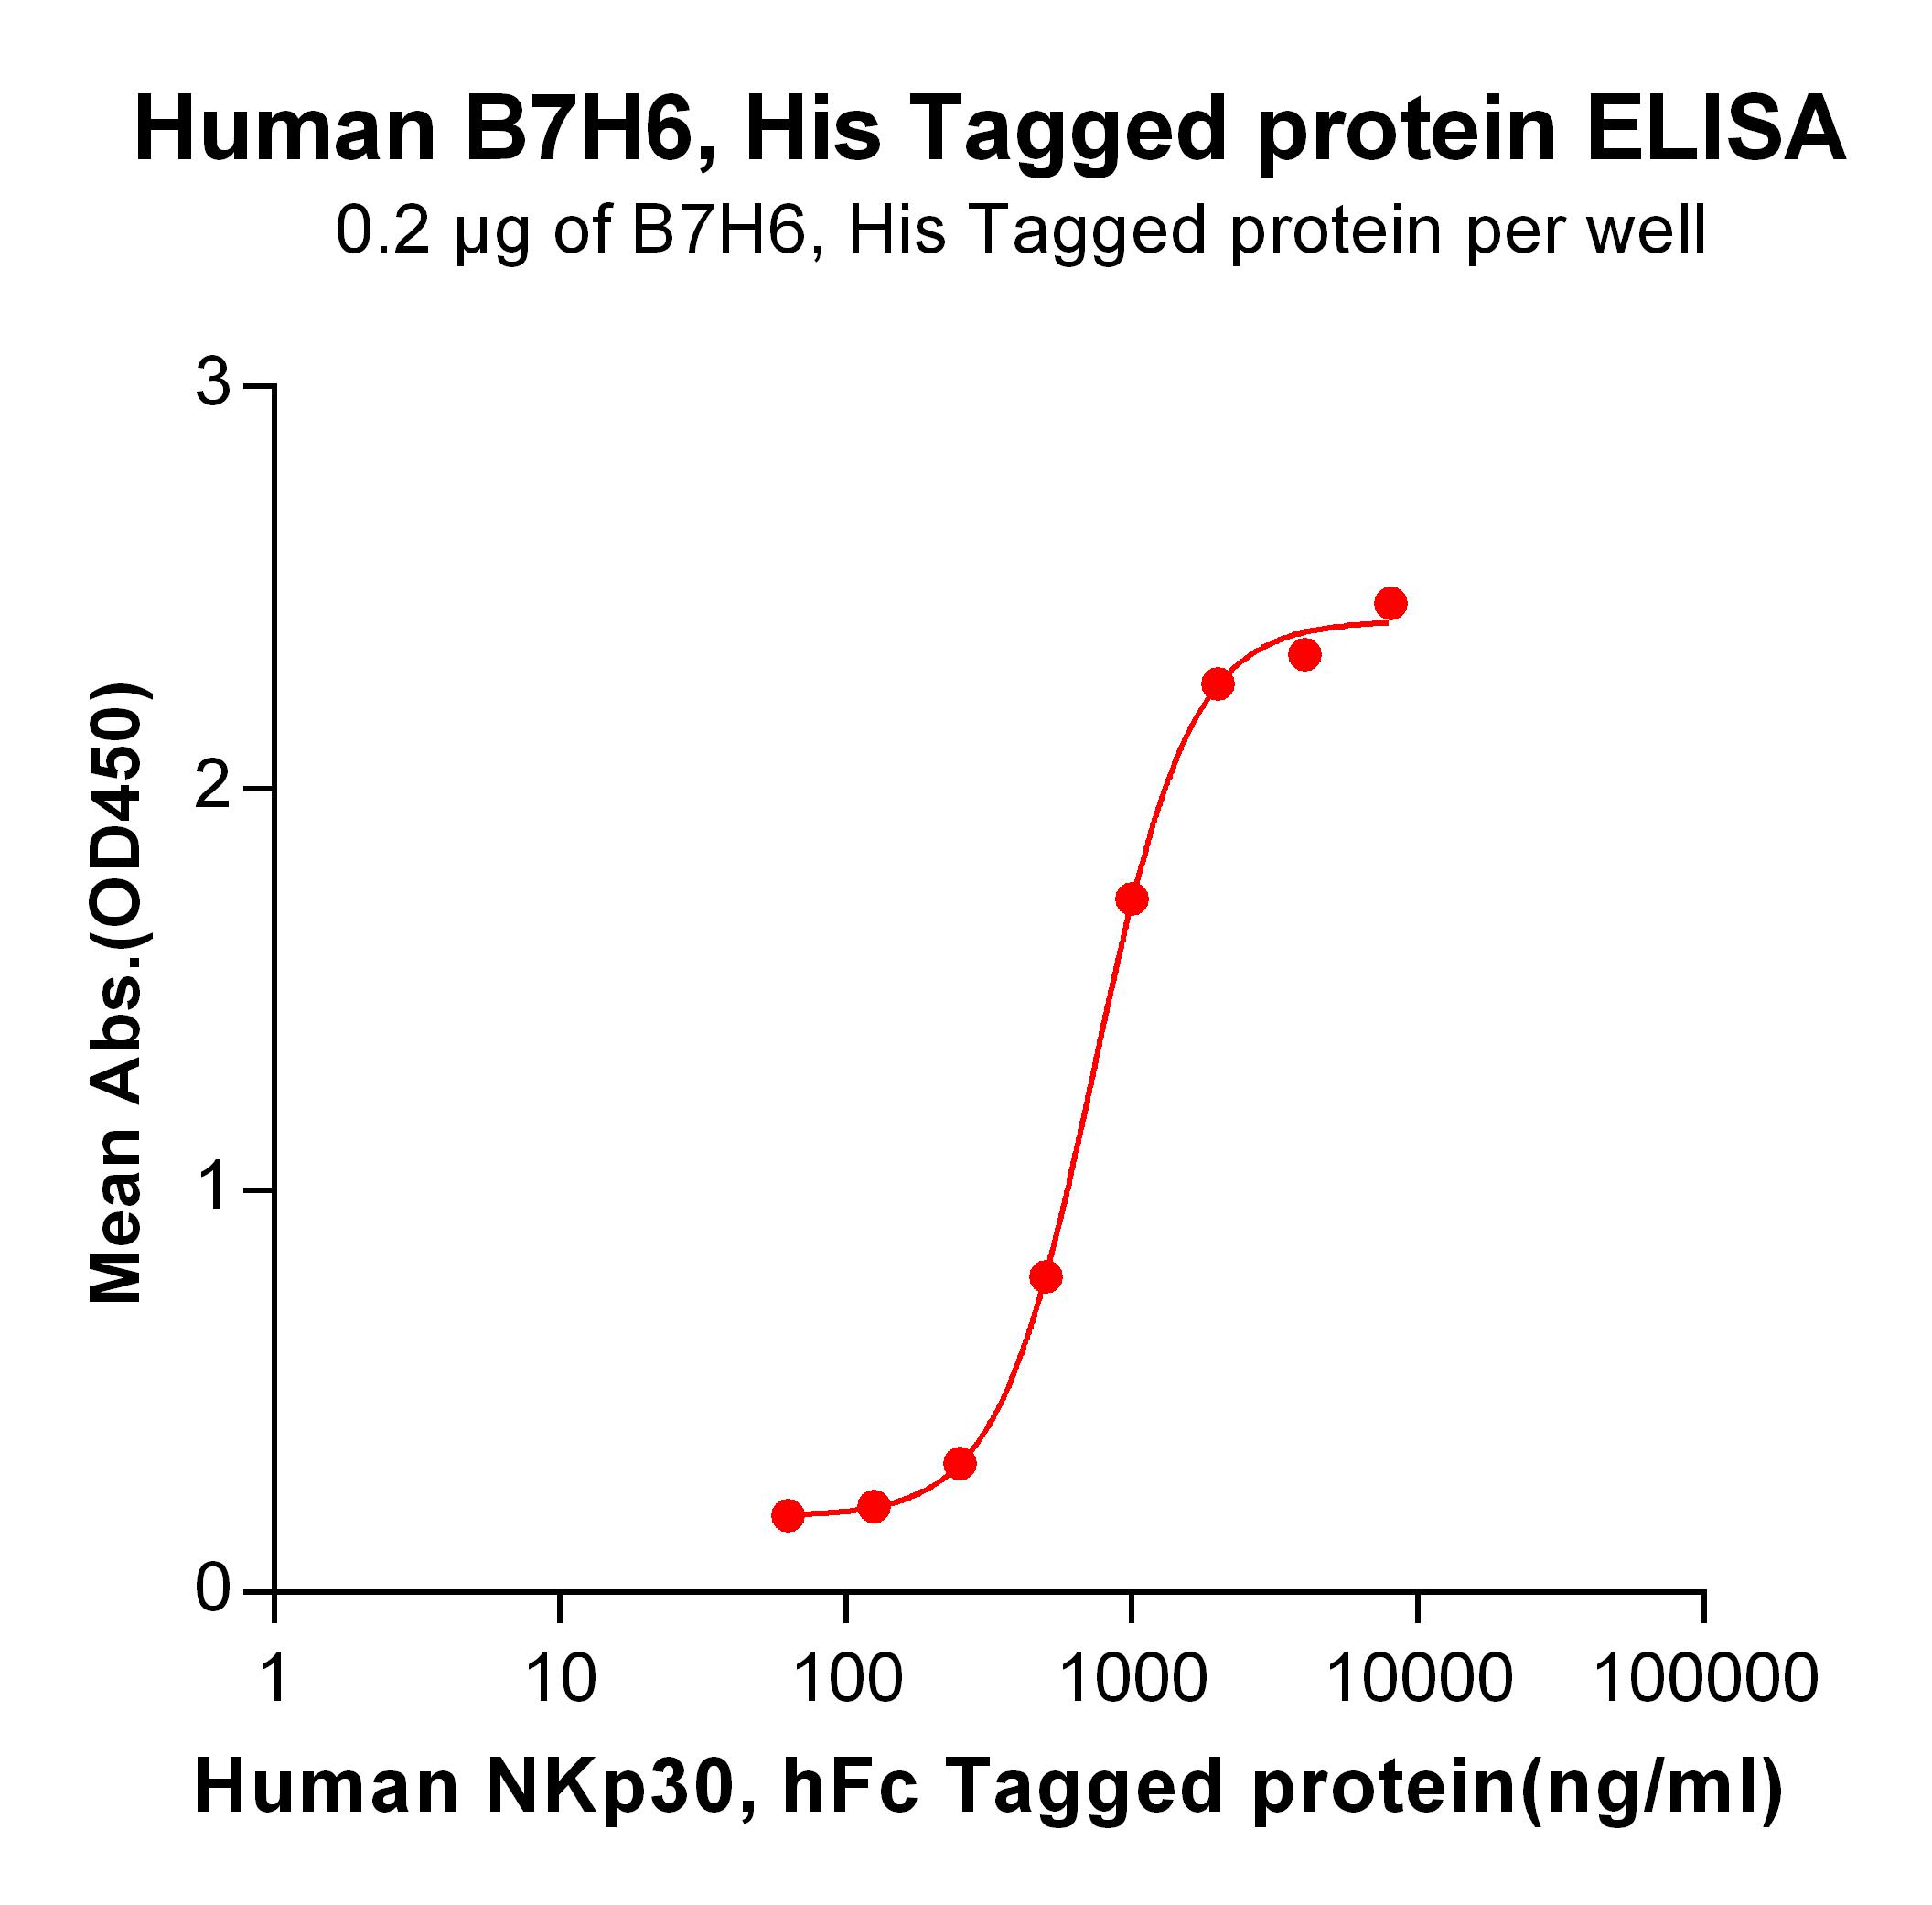 Figure 2. ELISA plate pre-coated by 2 µg/ml (100 µl/well) Human B7H6, His tagged protein  can bind Human NKp30, hFc tagged protein in a linear range of 250-2000 ng/ml.